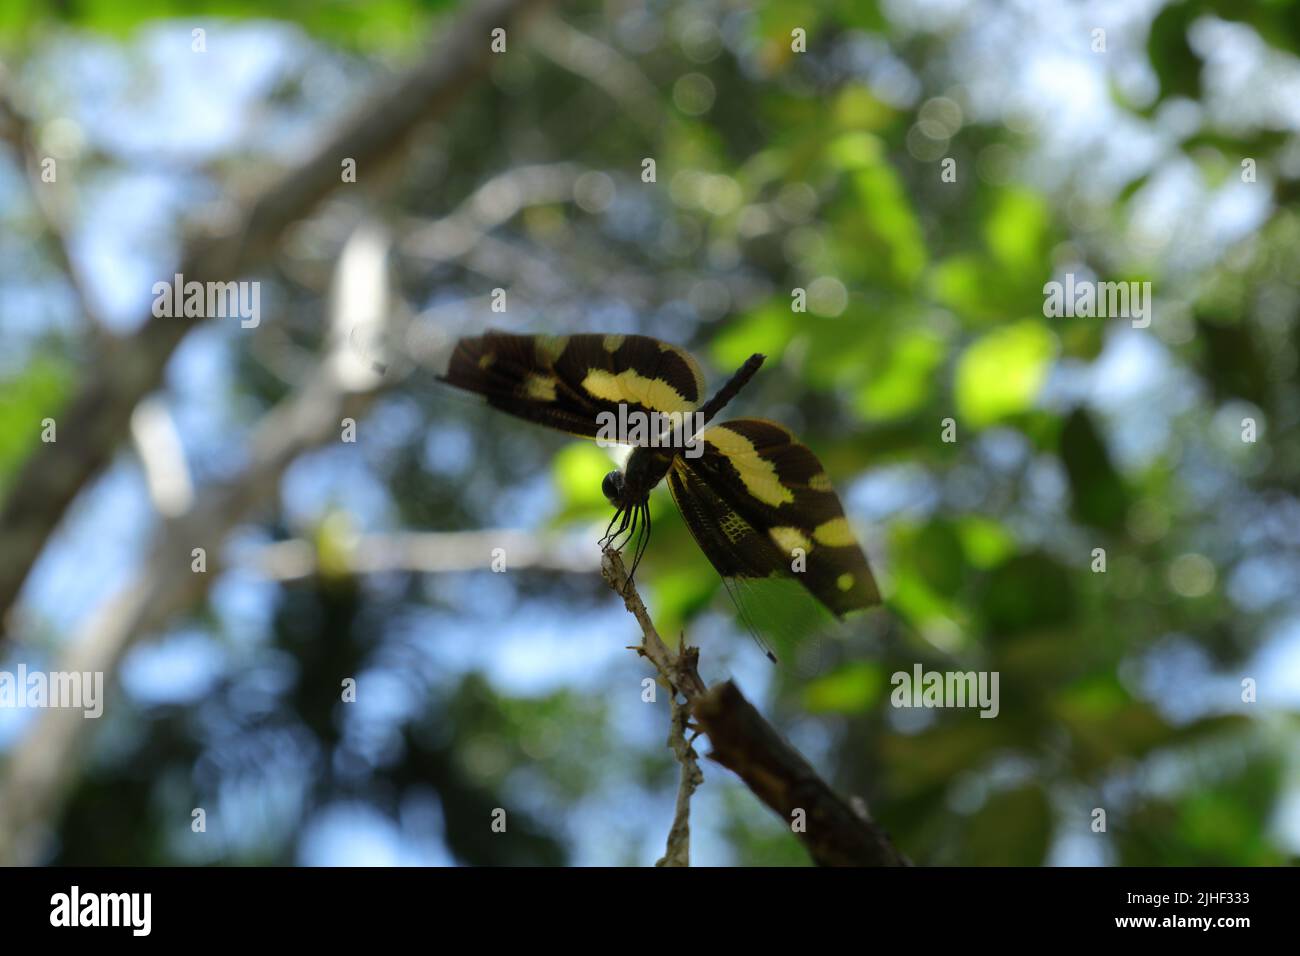 A Variegated Flutterer (Rhyothemis variegata) dragonfly is perched on top of a dry stem tip while spreading its wings angled to right, low angle view Stock Photo